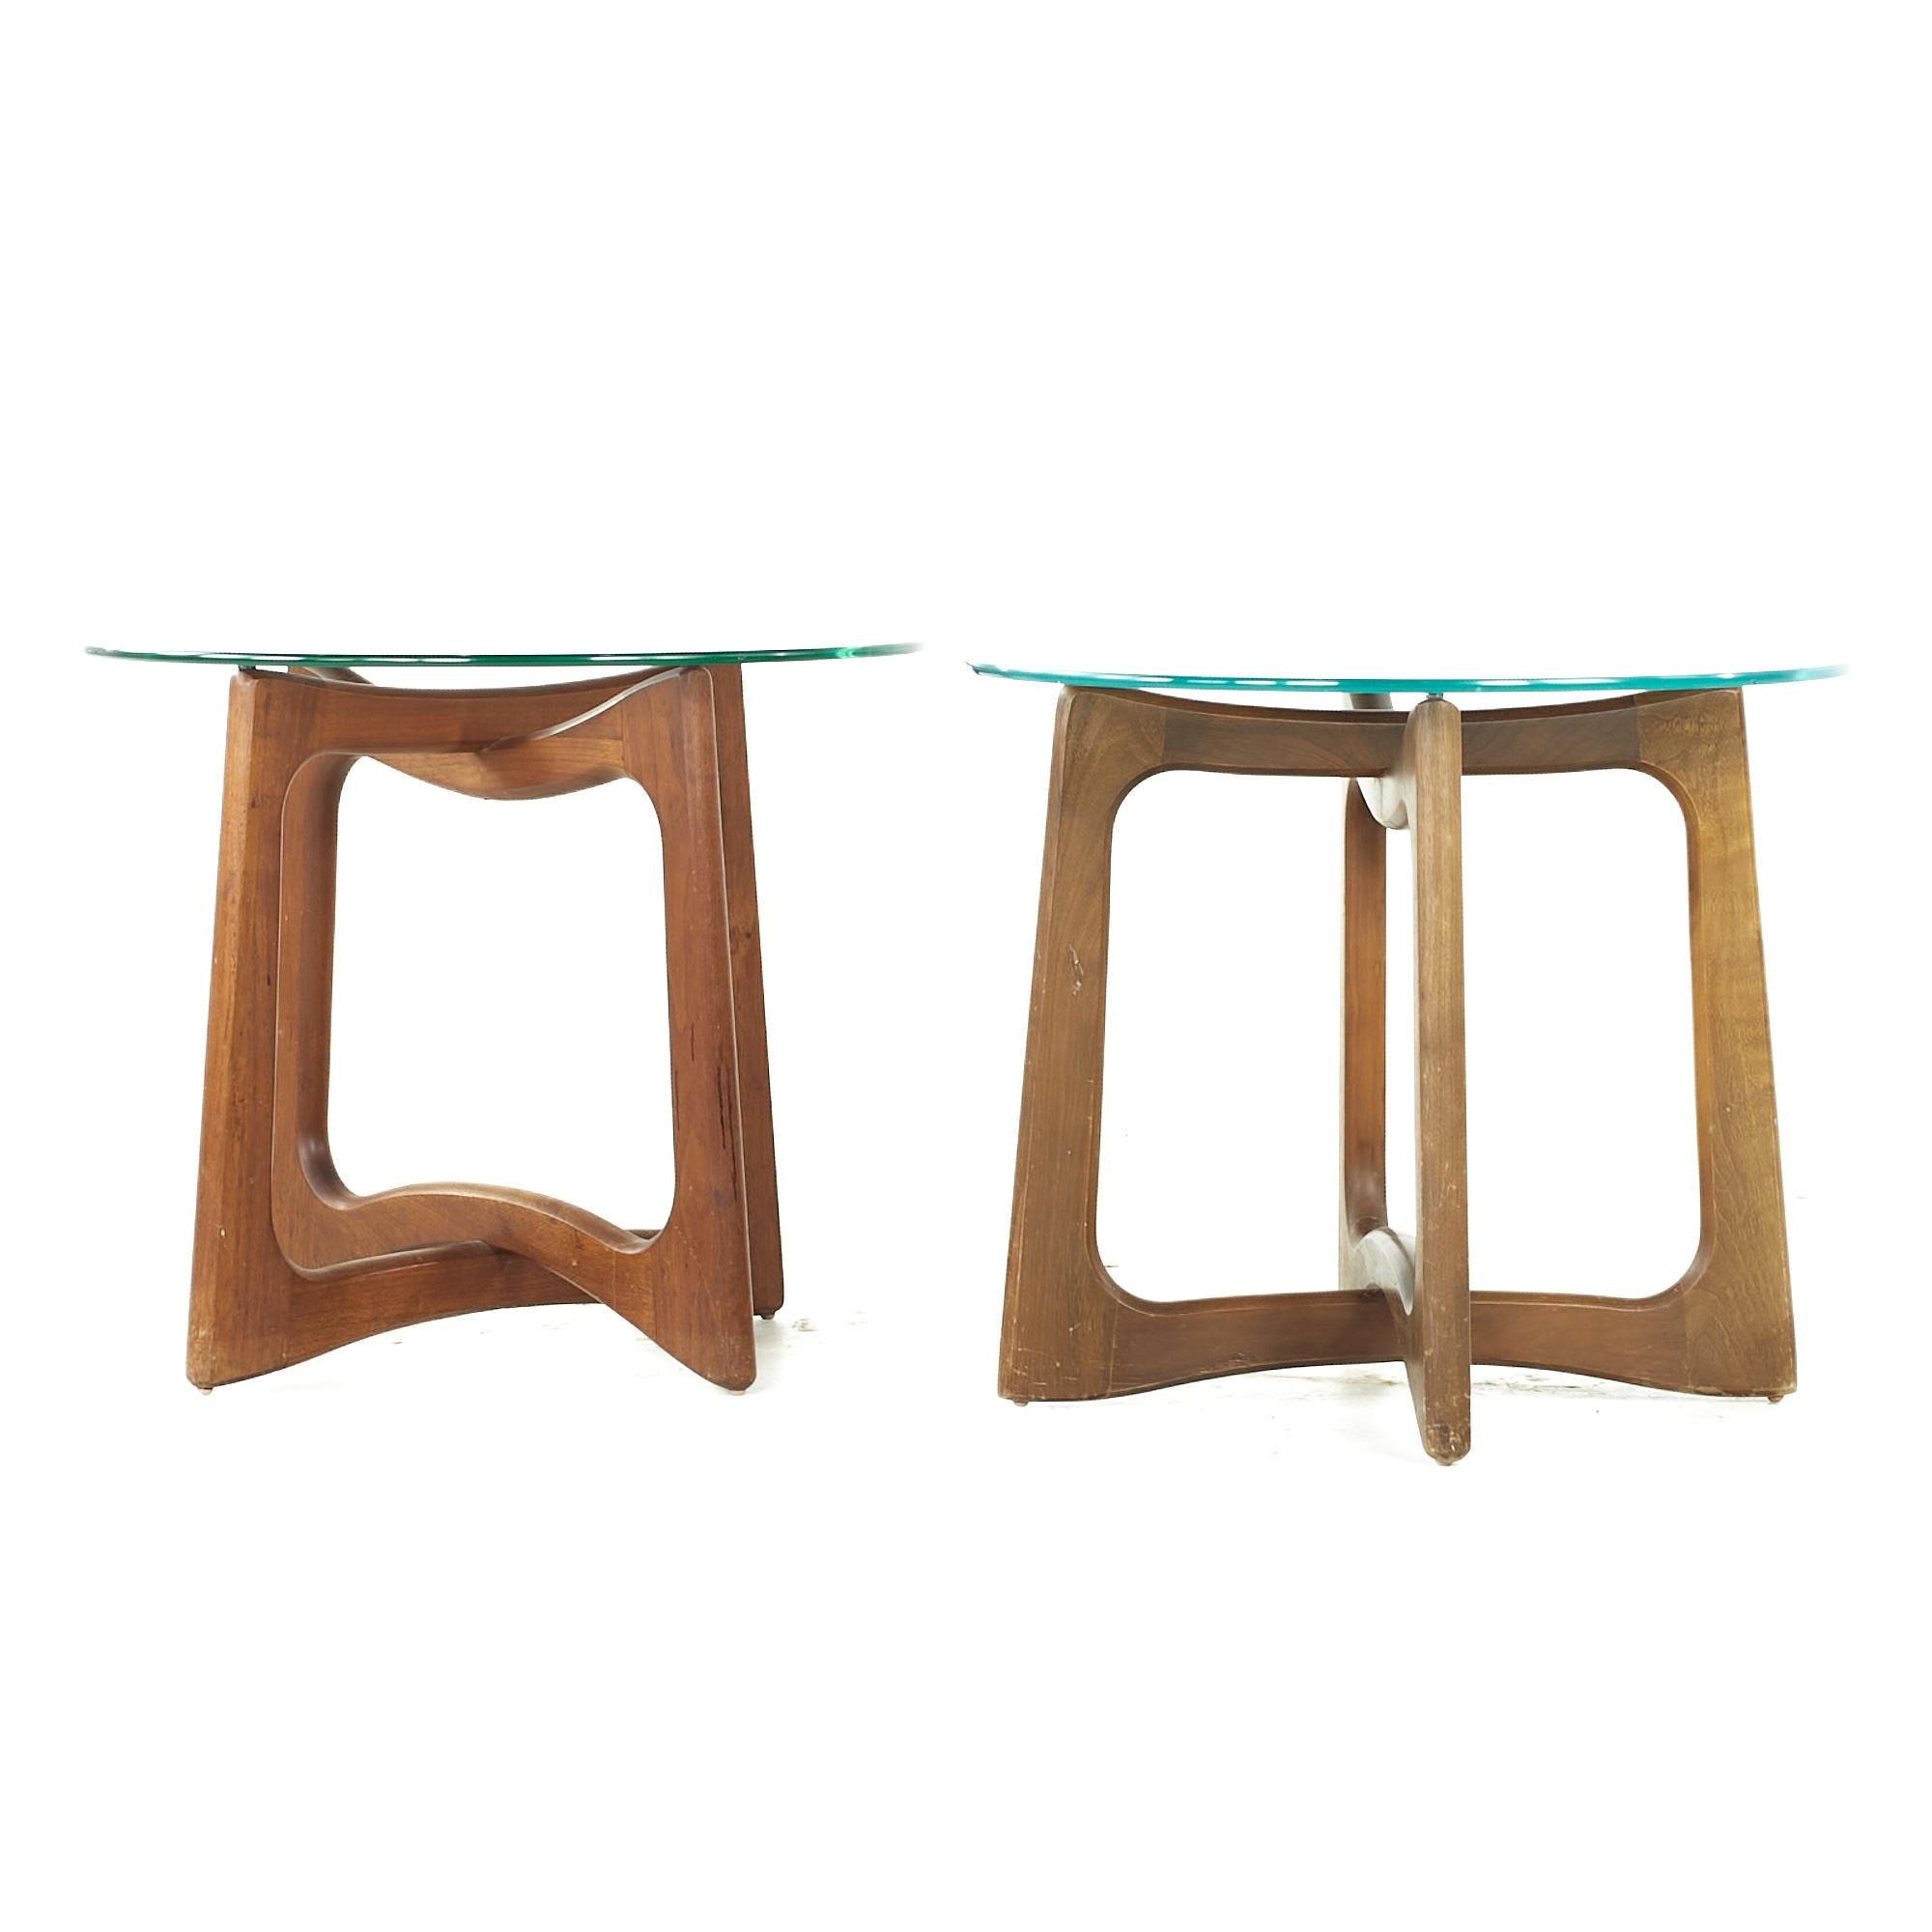 Mid-Century Modern Adrian Pearsall Midcentury Walnut and Glass Side Tables, Pair For Sale